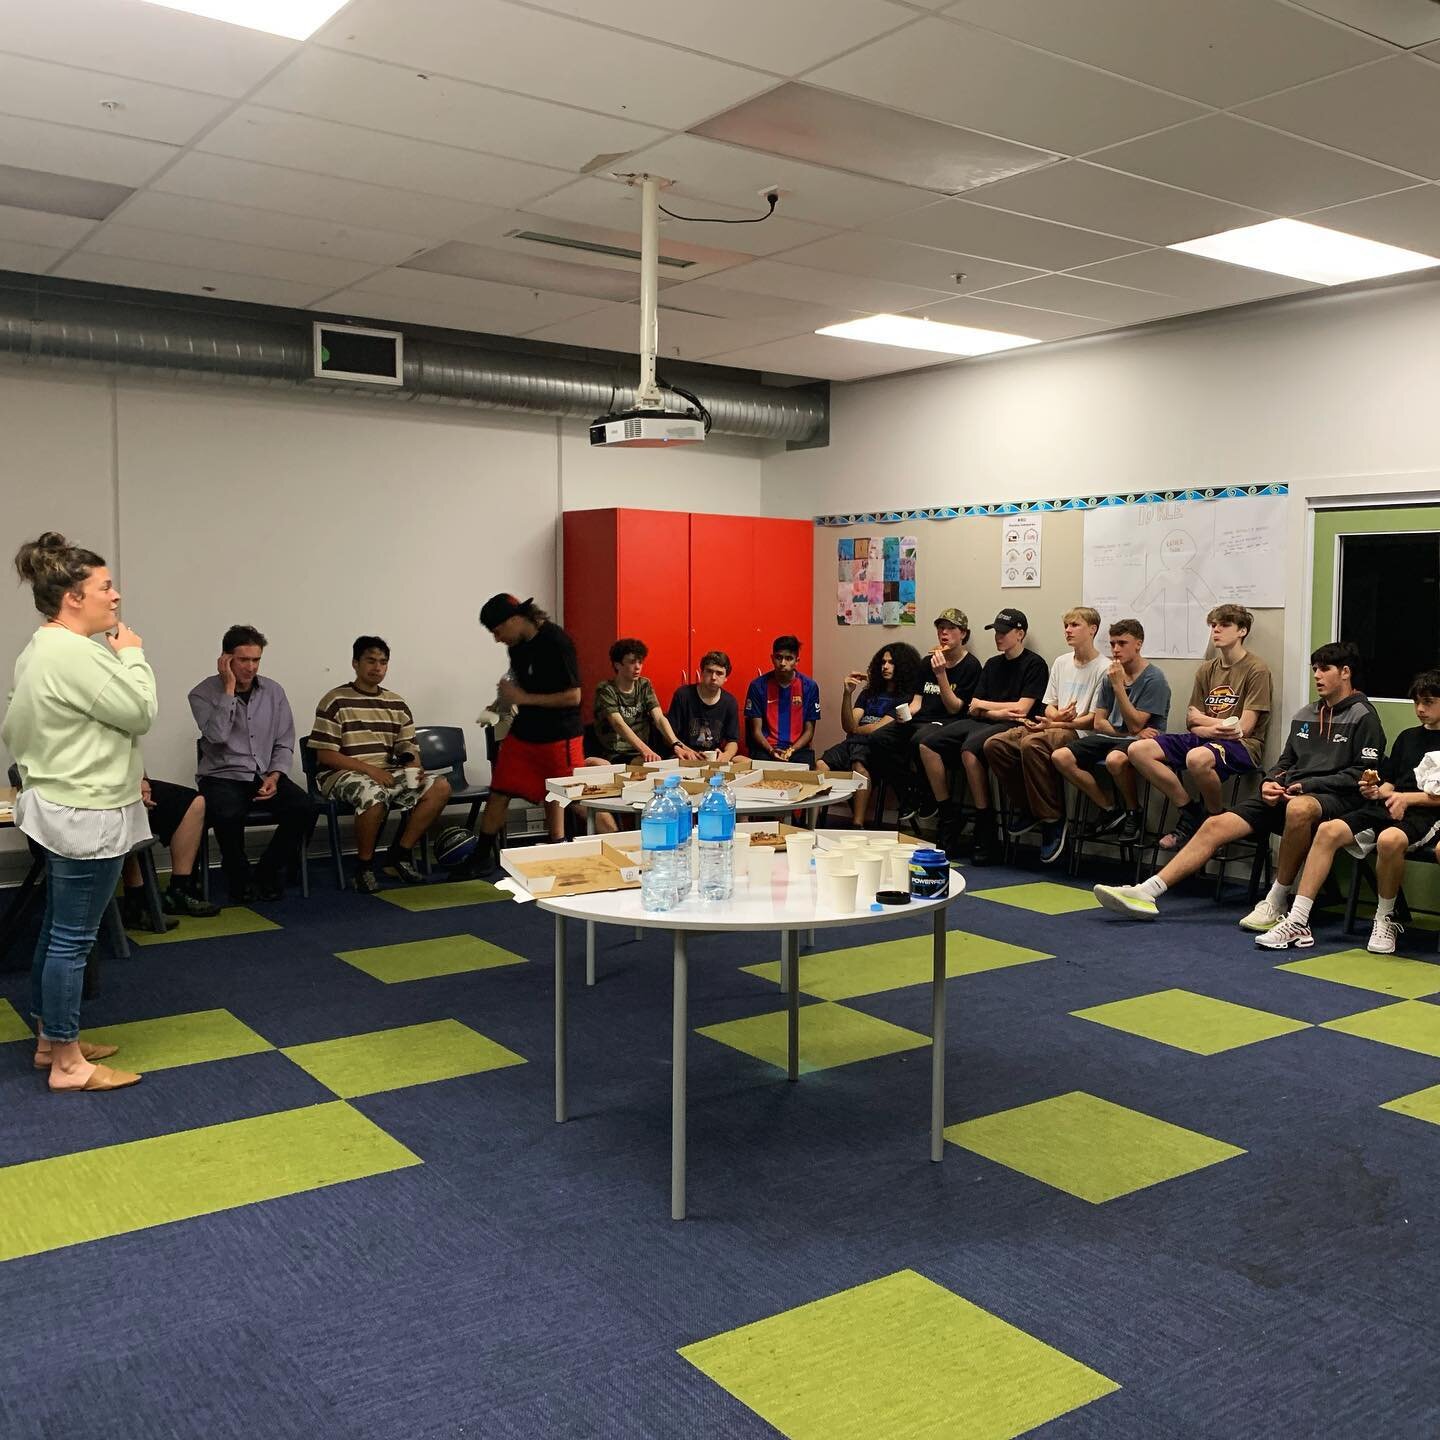 Pizzzzzza &amp; Pep Talk with Olivia from @cyctrust giving a good reminder to look out for your mental health&hellip;And we all know that being active and playing a bit of ball does so much good&hellip;.keep balling ballers! ✊😁🏀